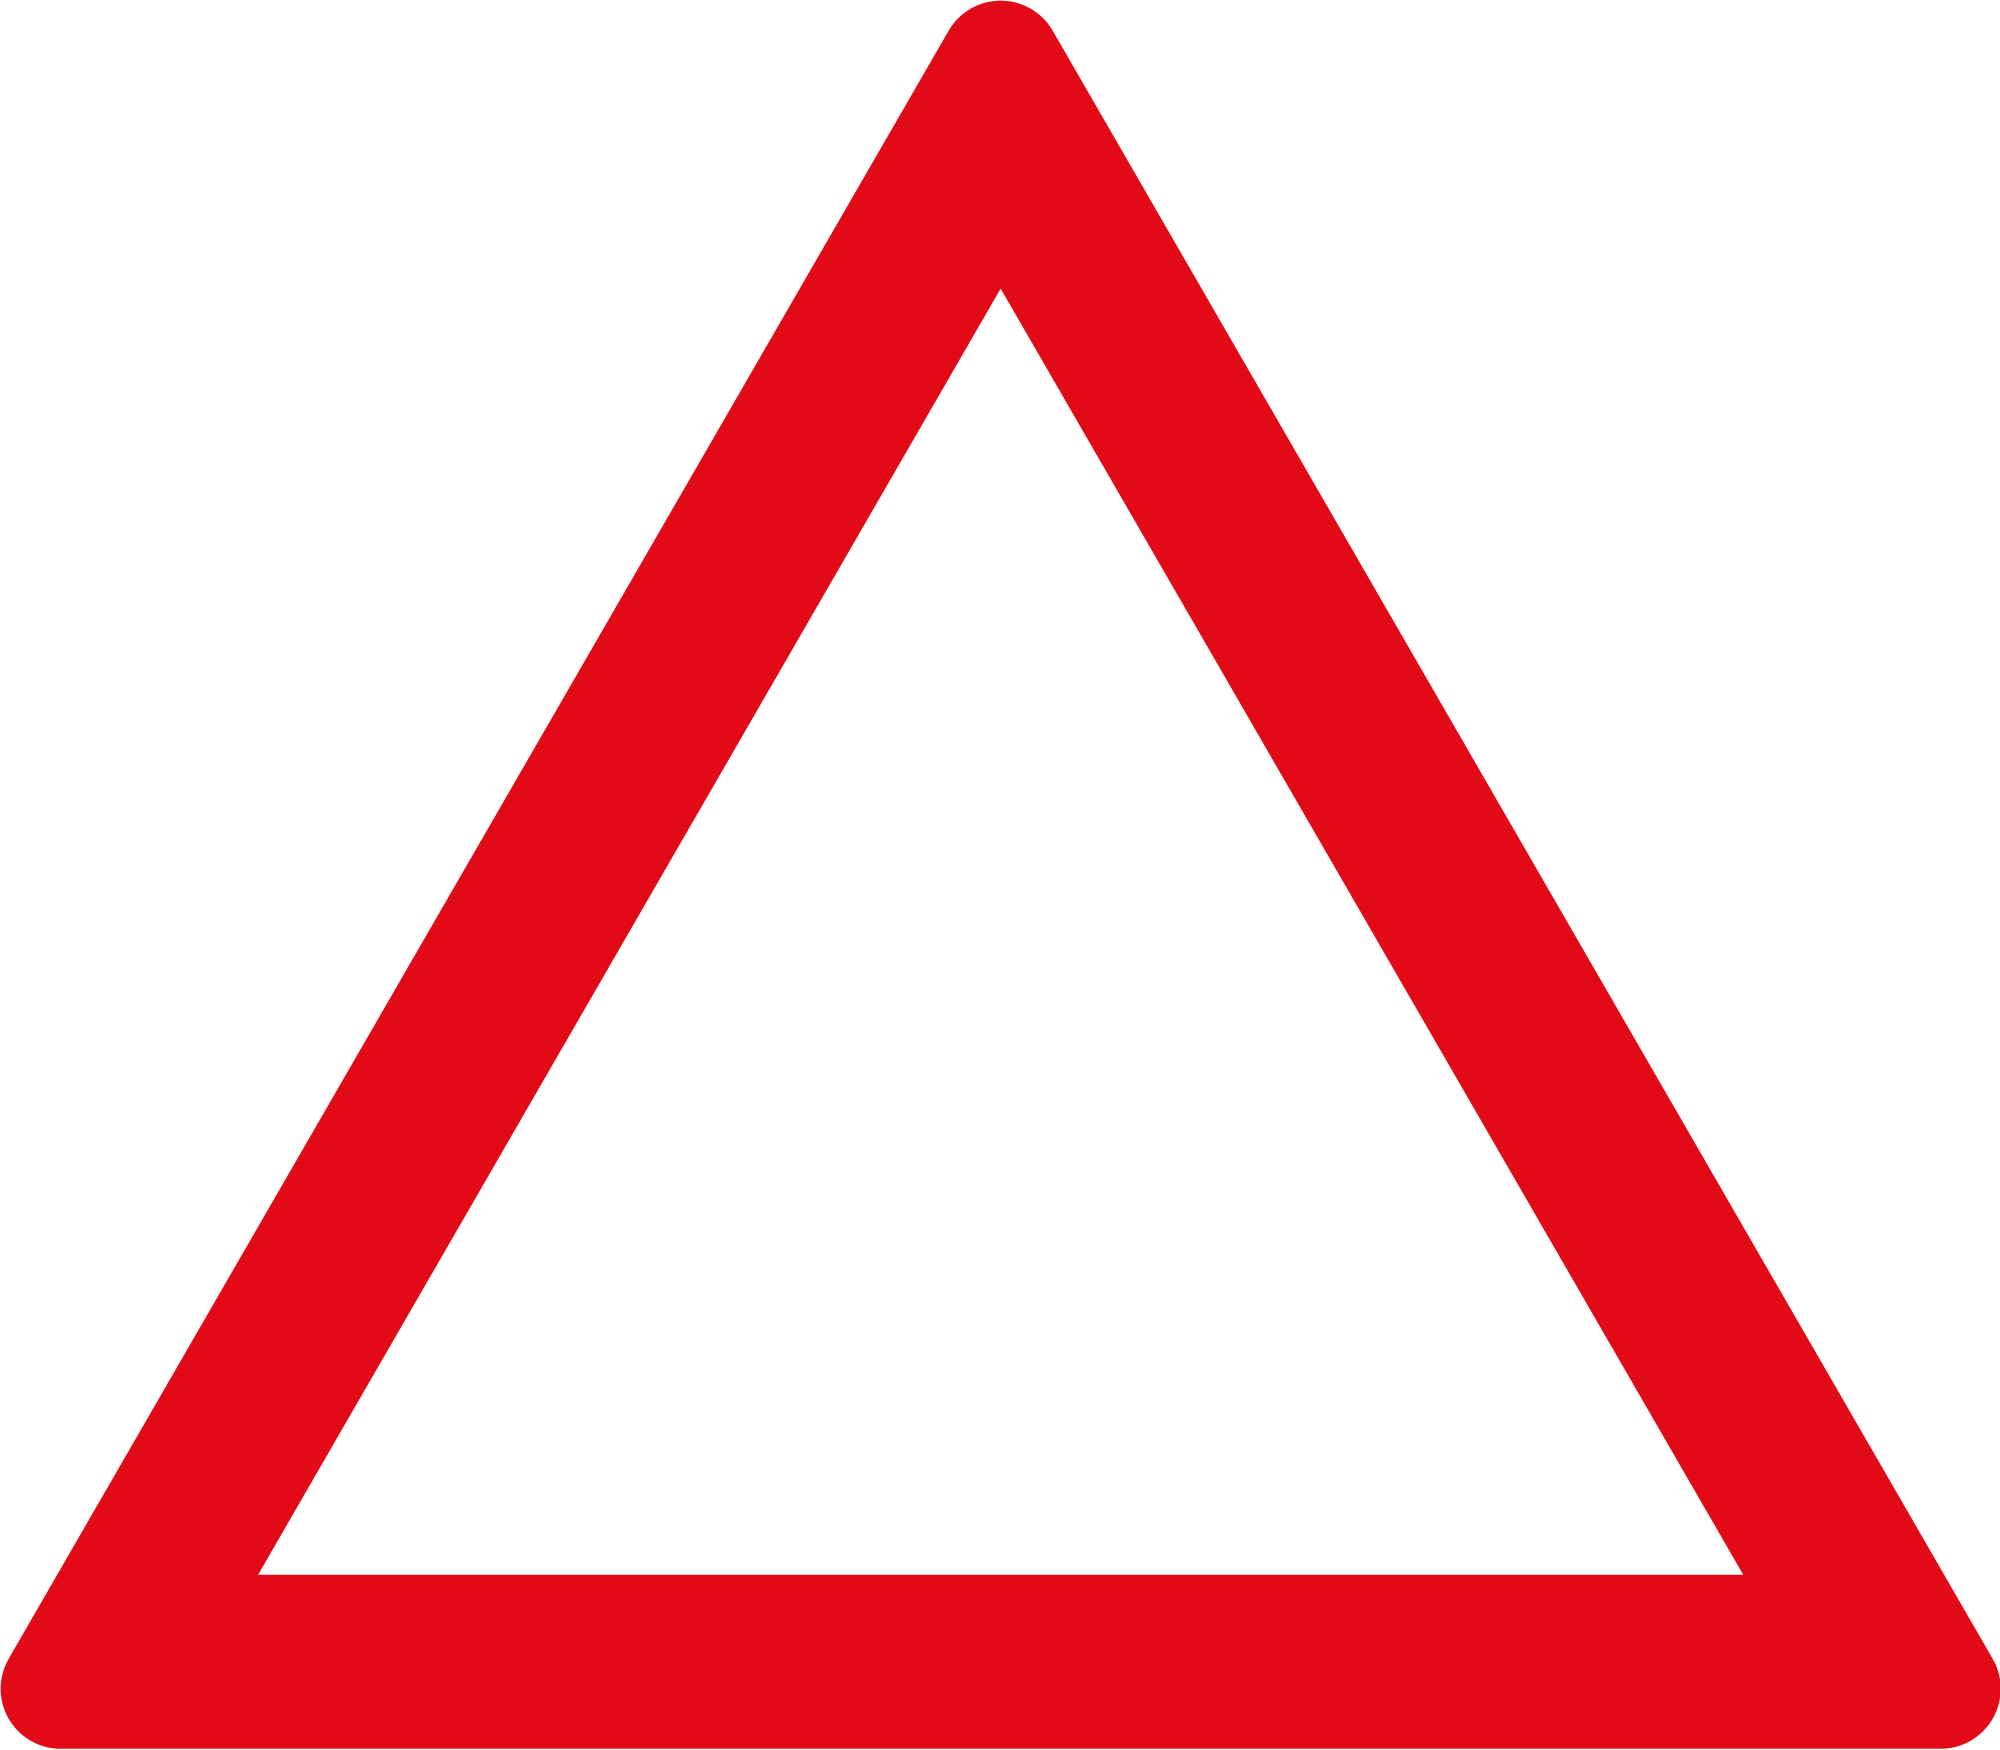 Red Triangle White Line Logo - Triangle warning sign (red and white).svg